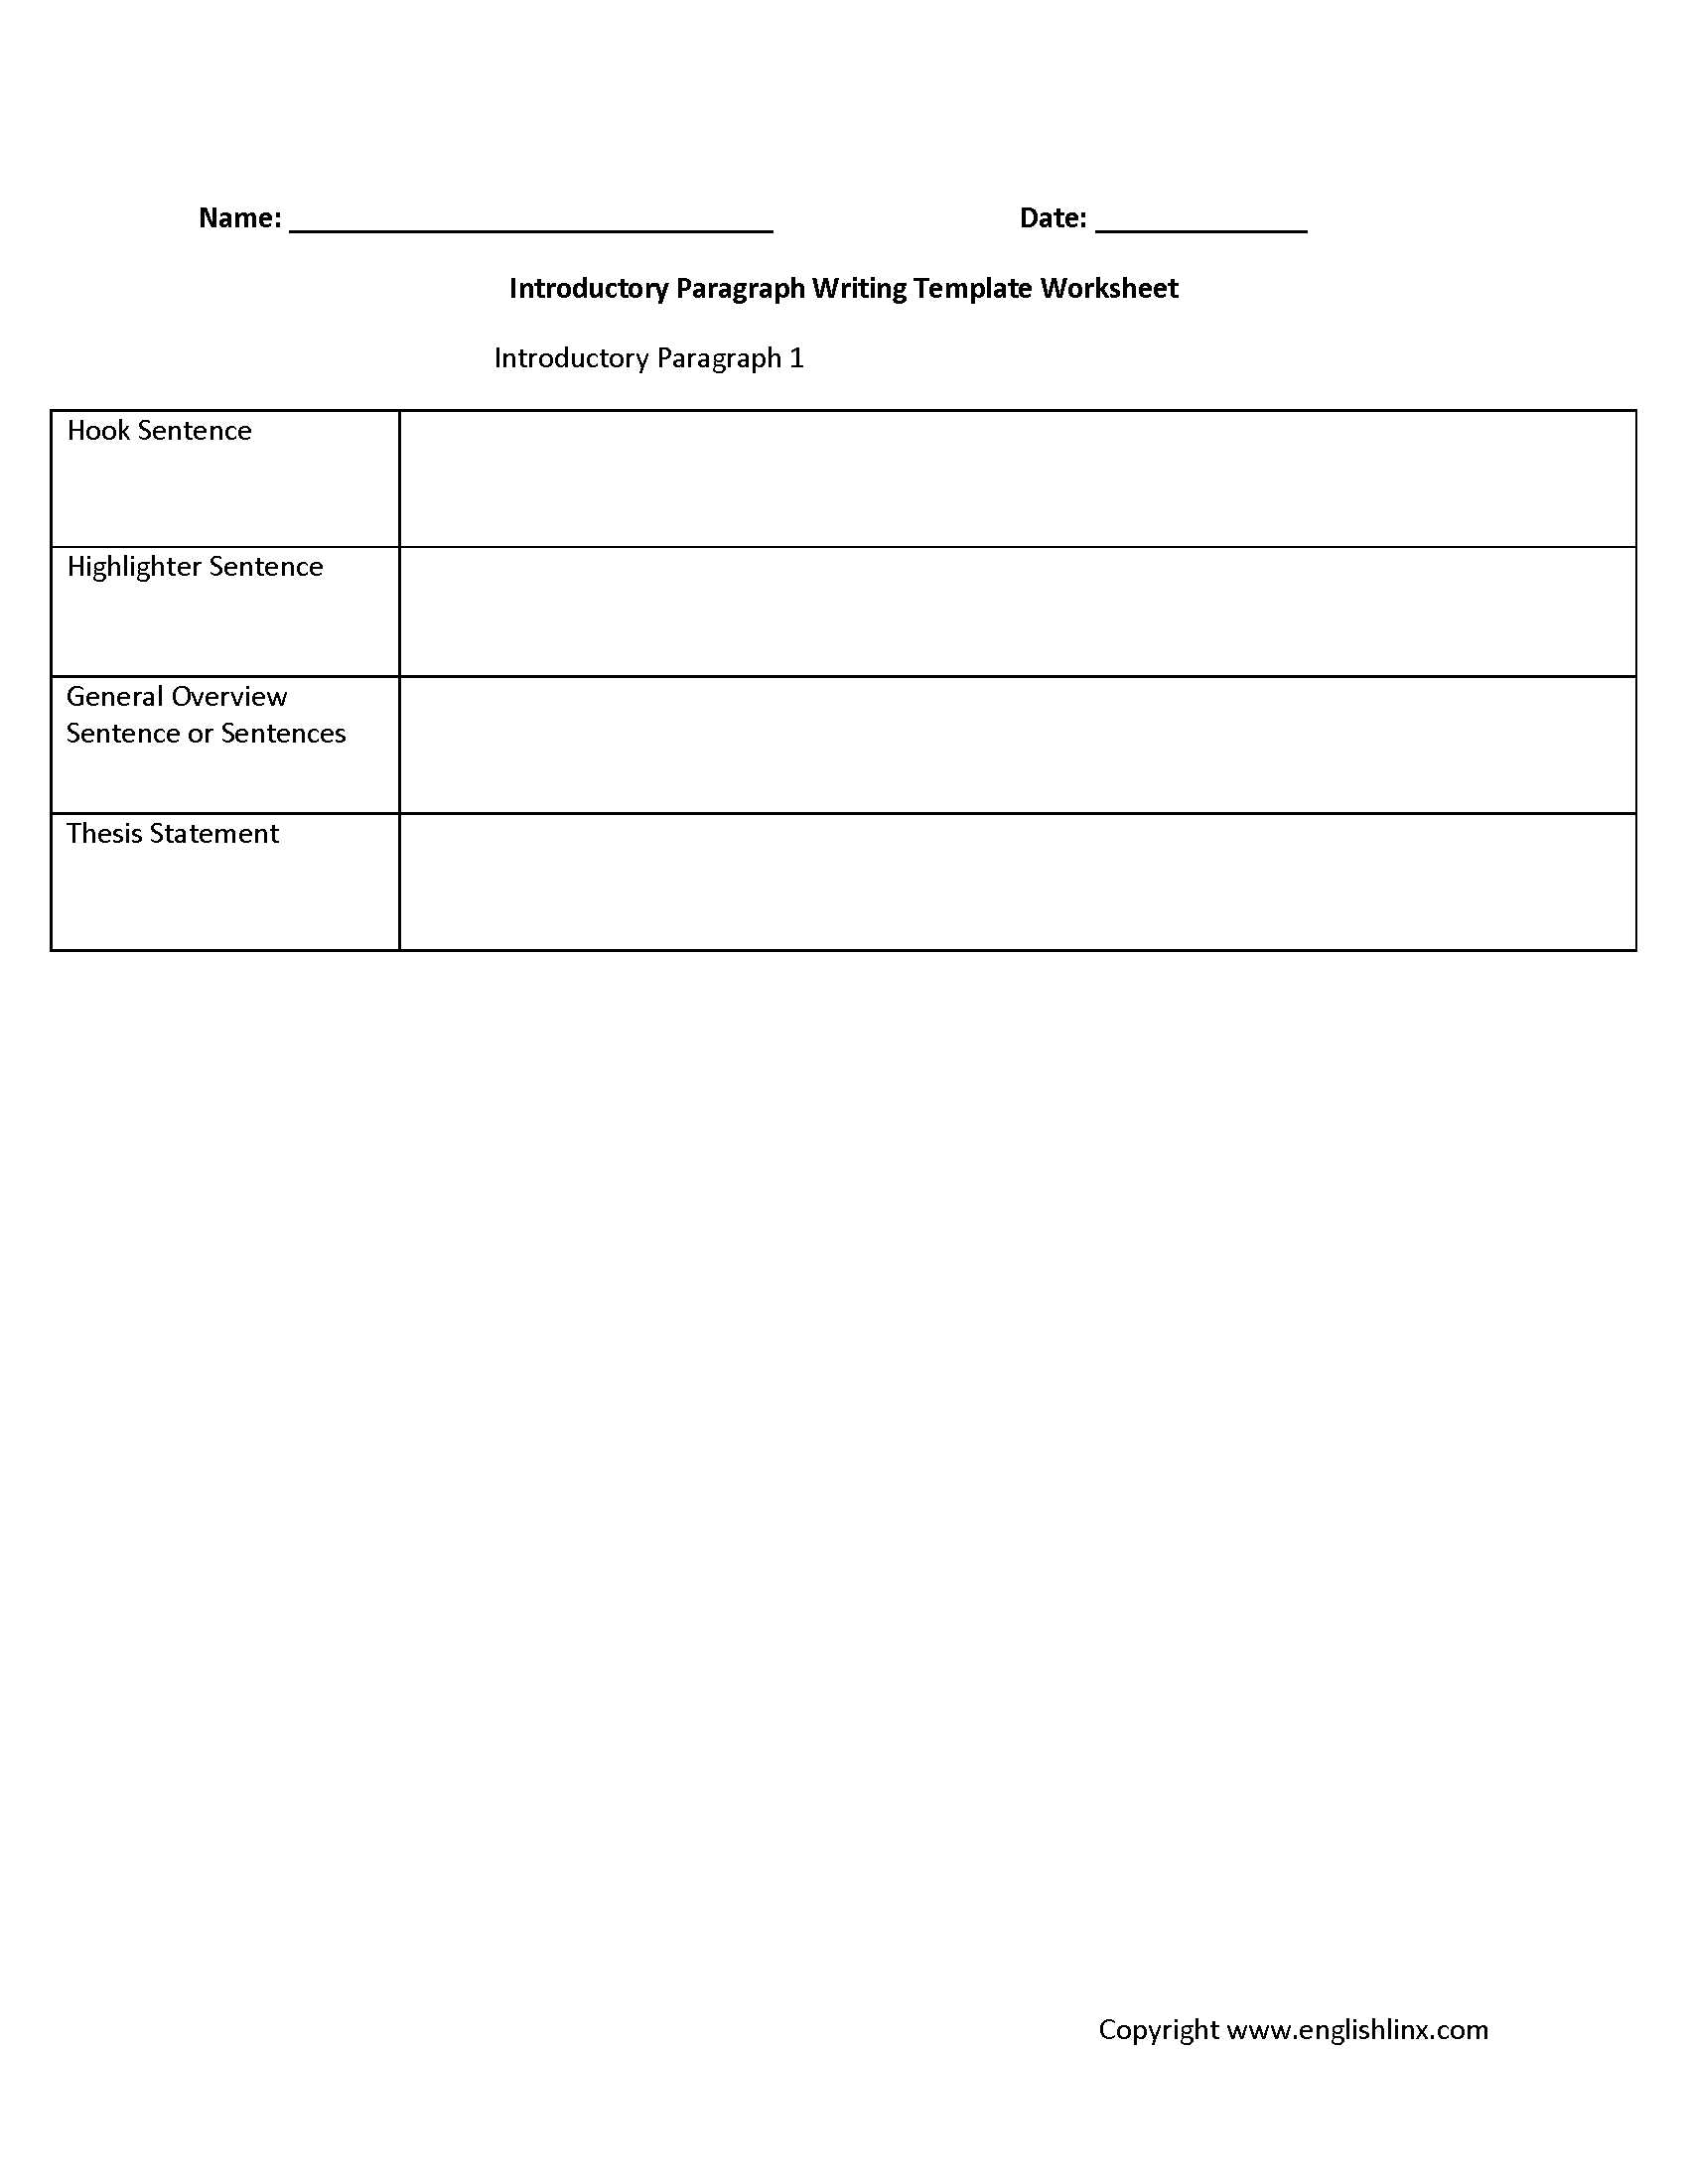 Writing Sentences Worksheets Along with Introductory Paragraph Writing Template Worksheet